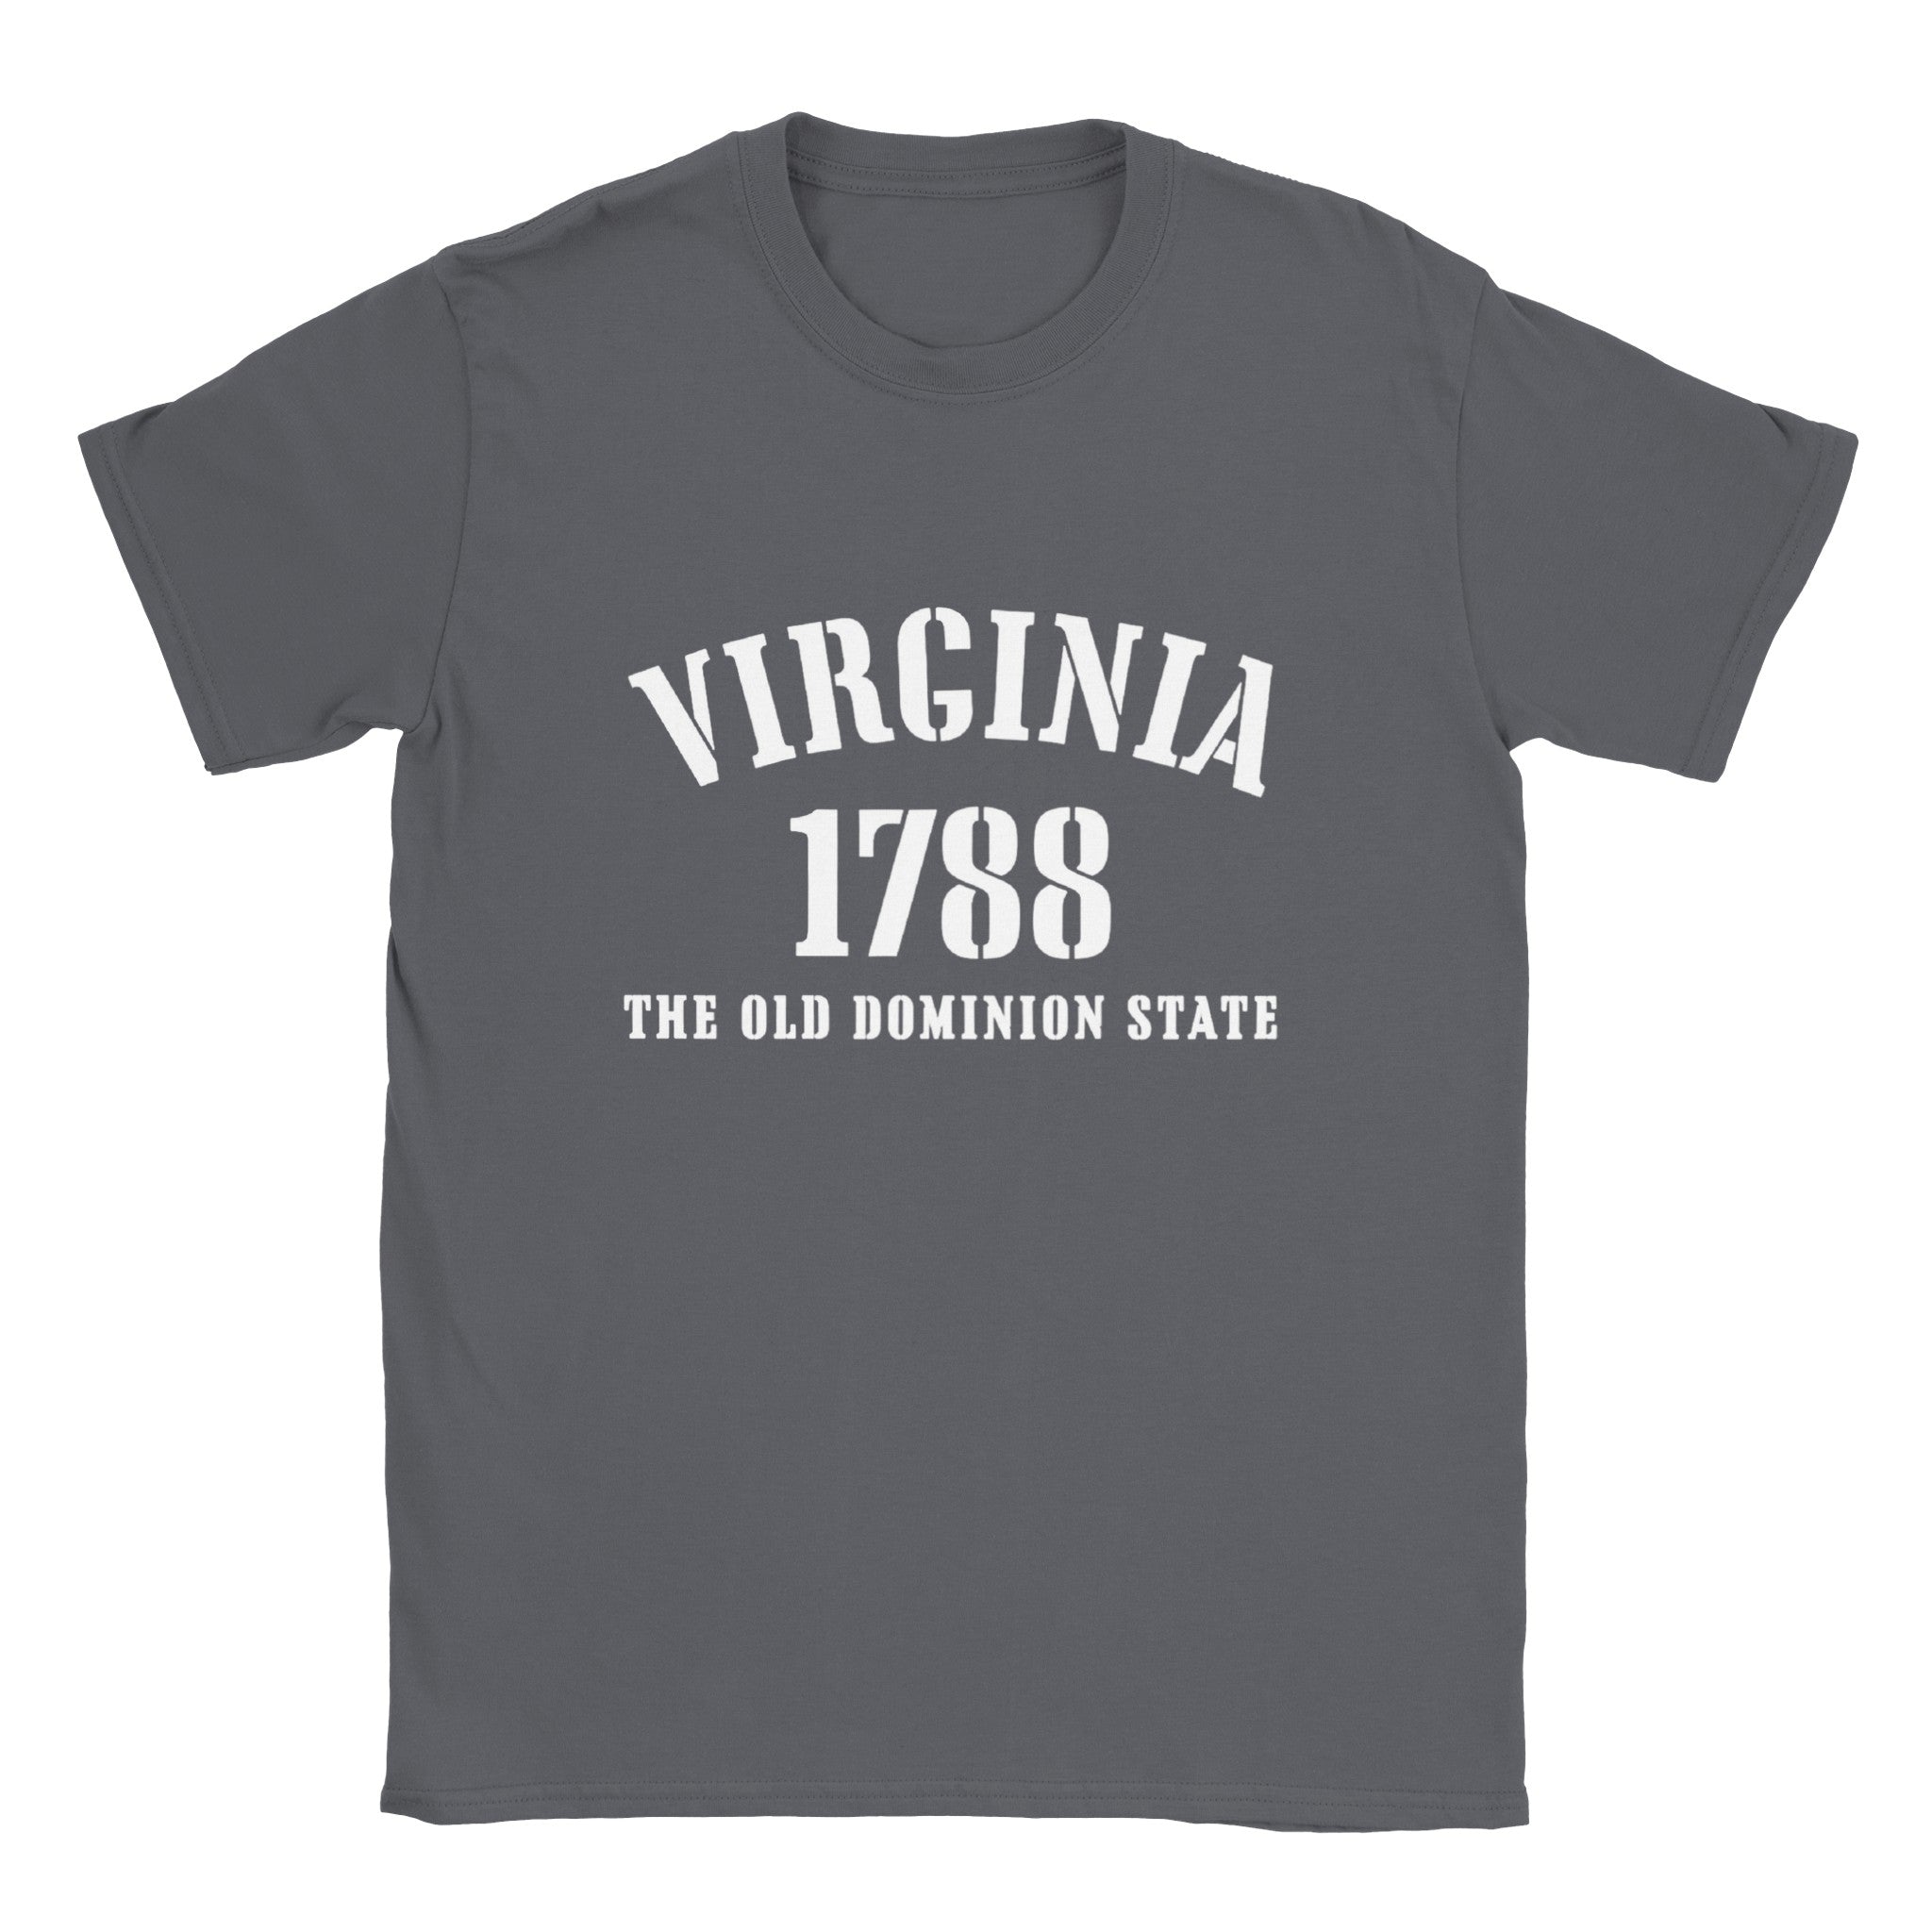 Virginia- Classic Unisex Crewneck States T-shirt - Creations by Chris and Carlos